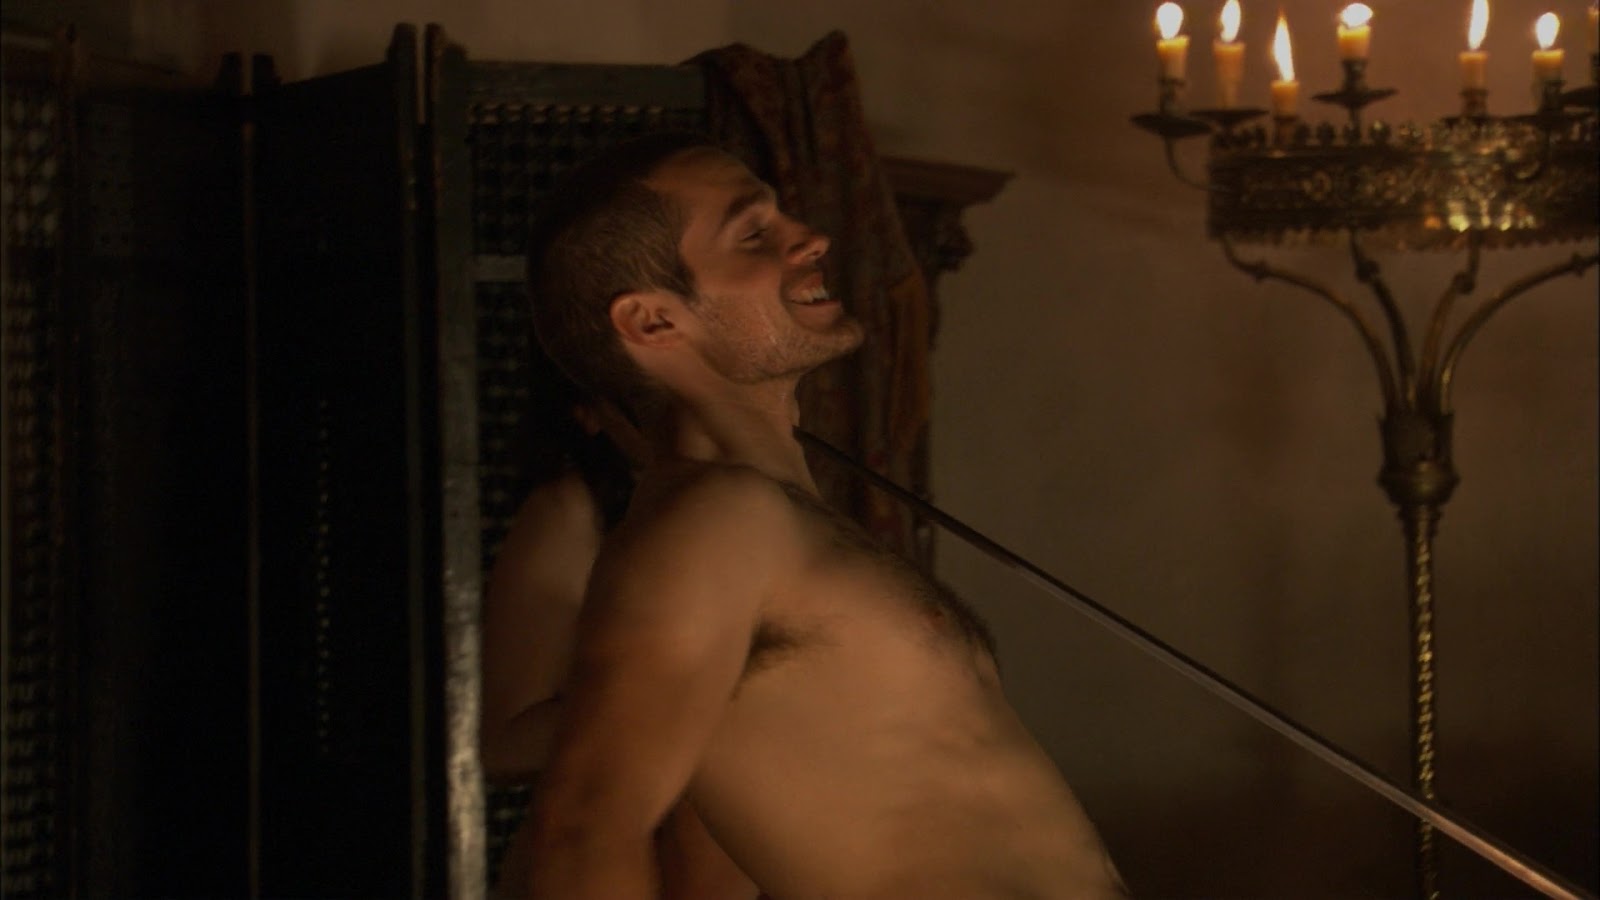 Henry Cavill nude in The Tudors 1-01 "In Cold Blood" .